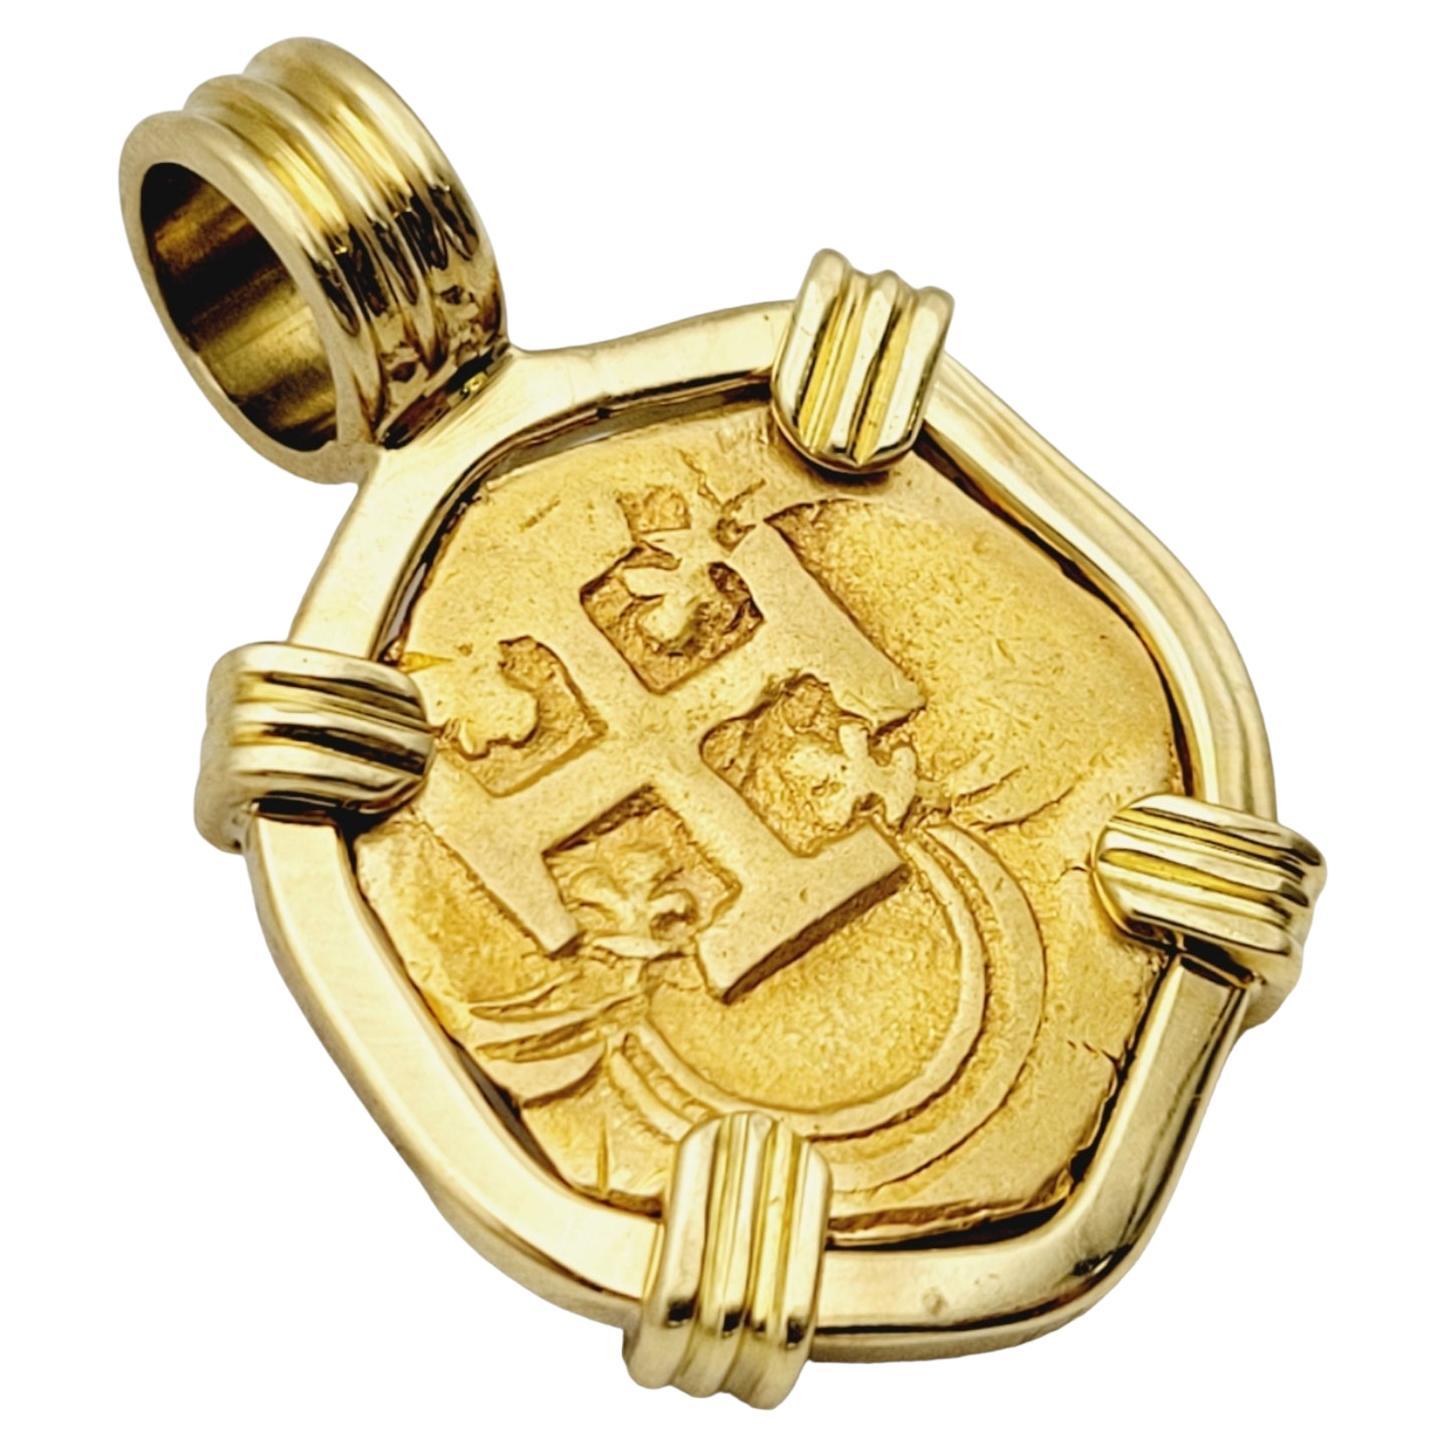 Authentic Spain 4 Escudos Shipwreck Jewelry Treasure Coin Necklace - Pirate  Gold Coins